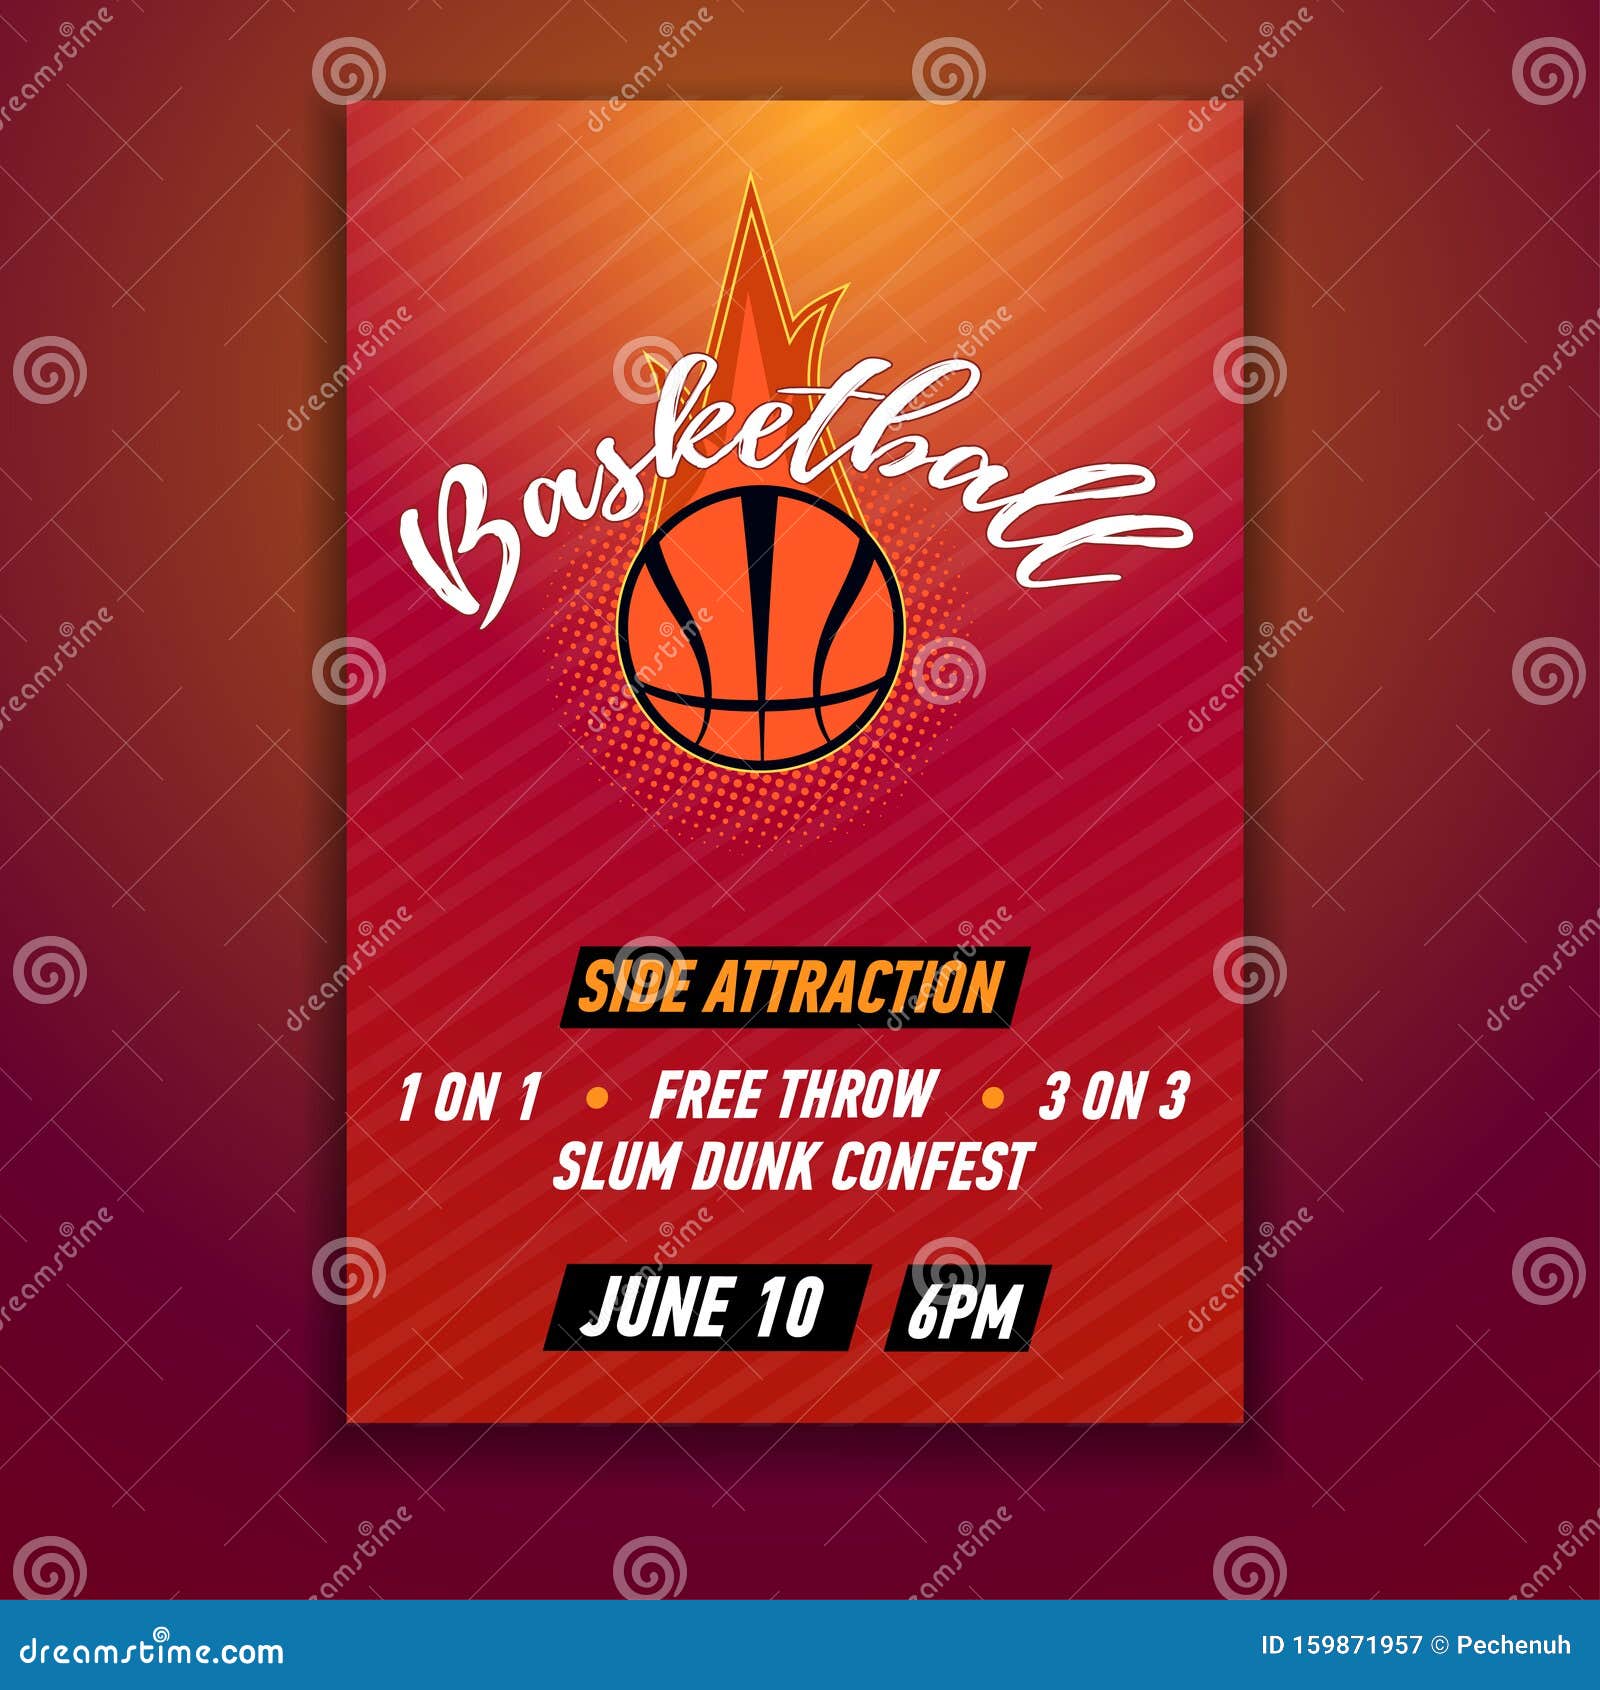 basketball poster with ball playoff advertising. event announcement